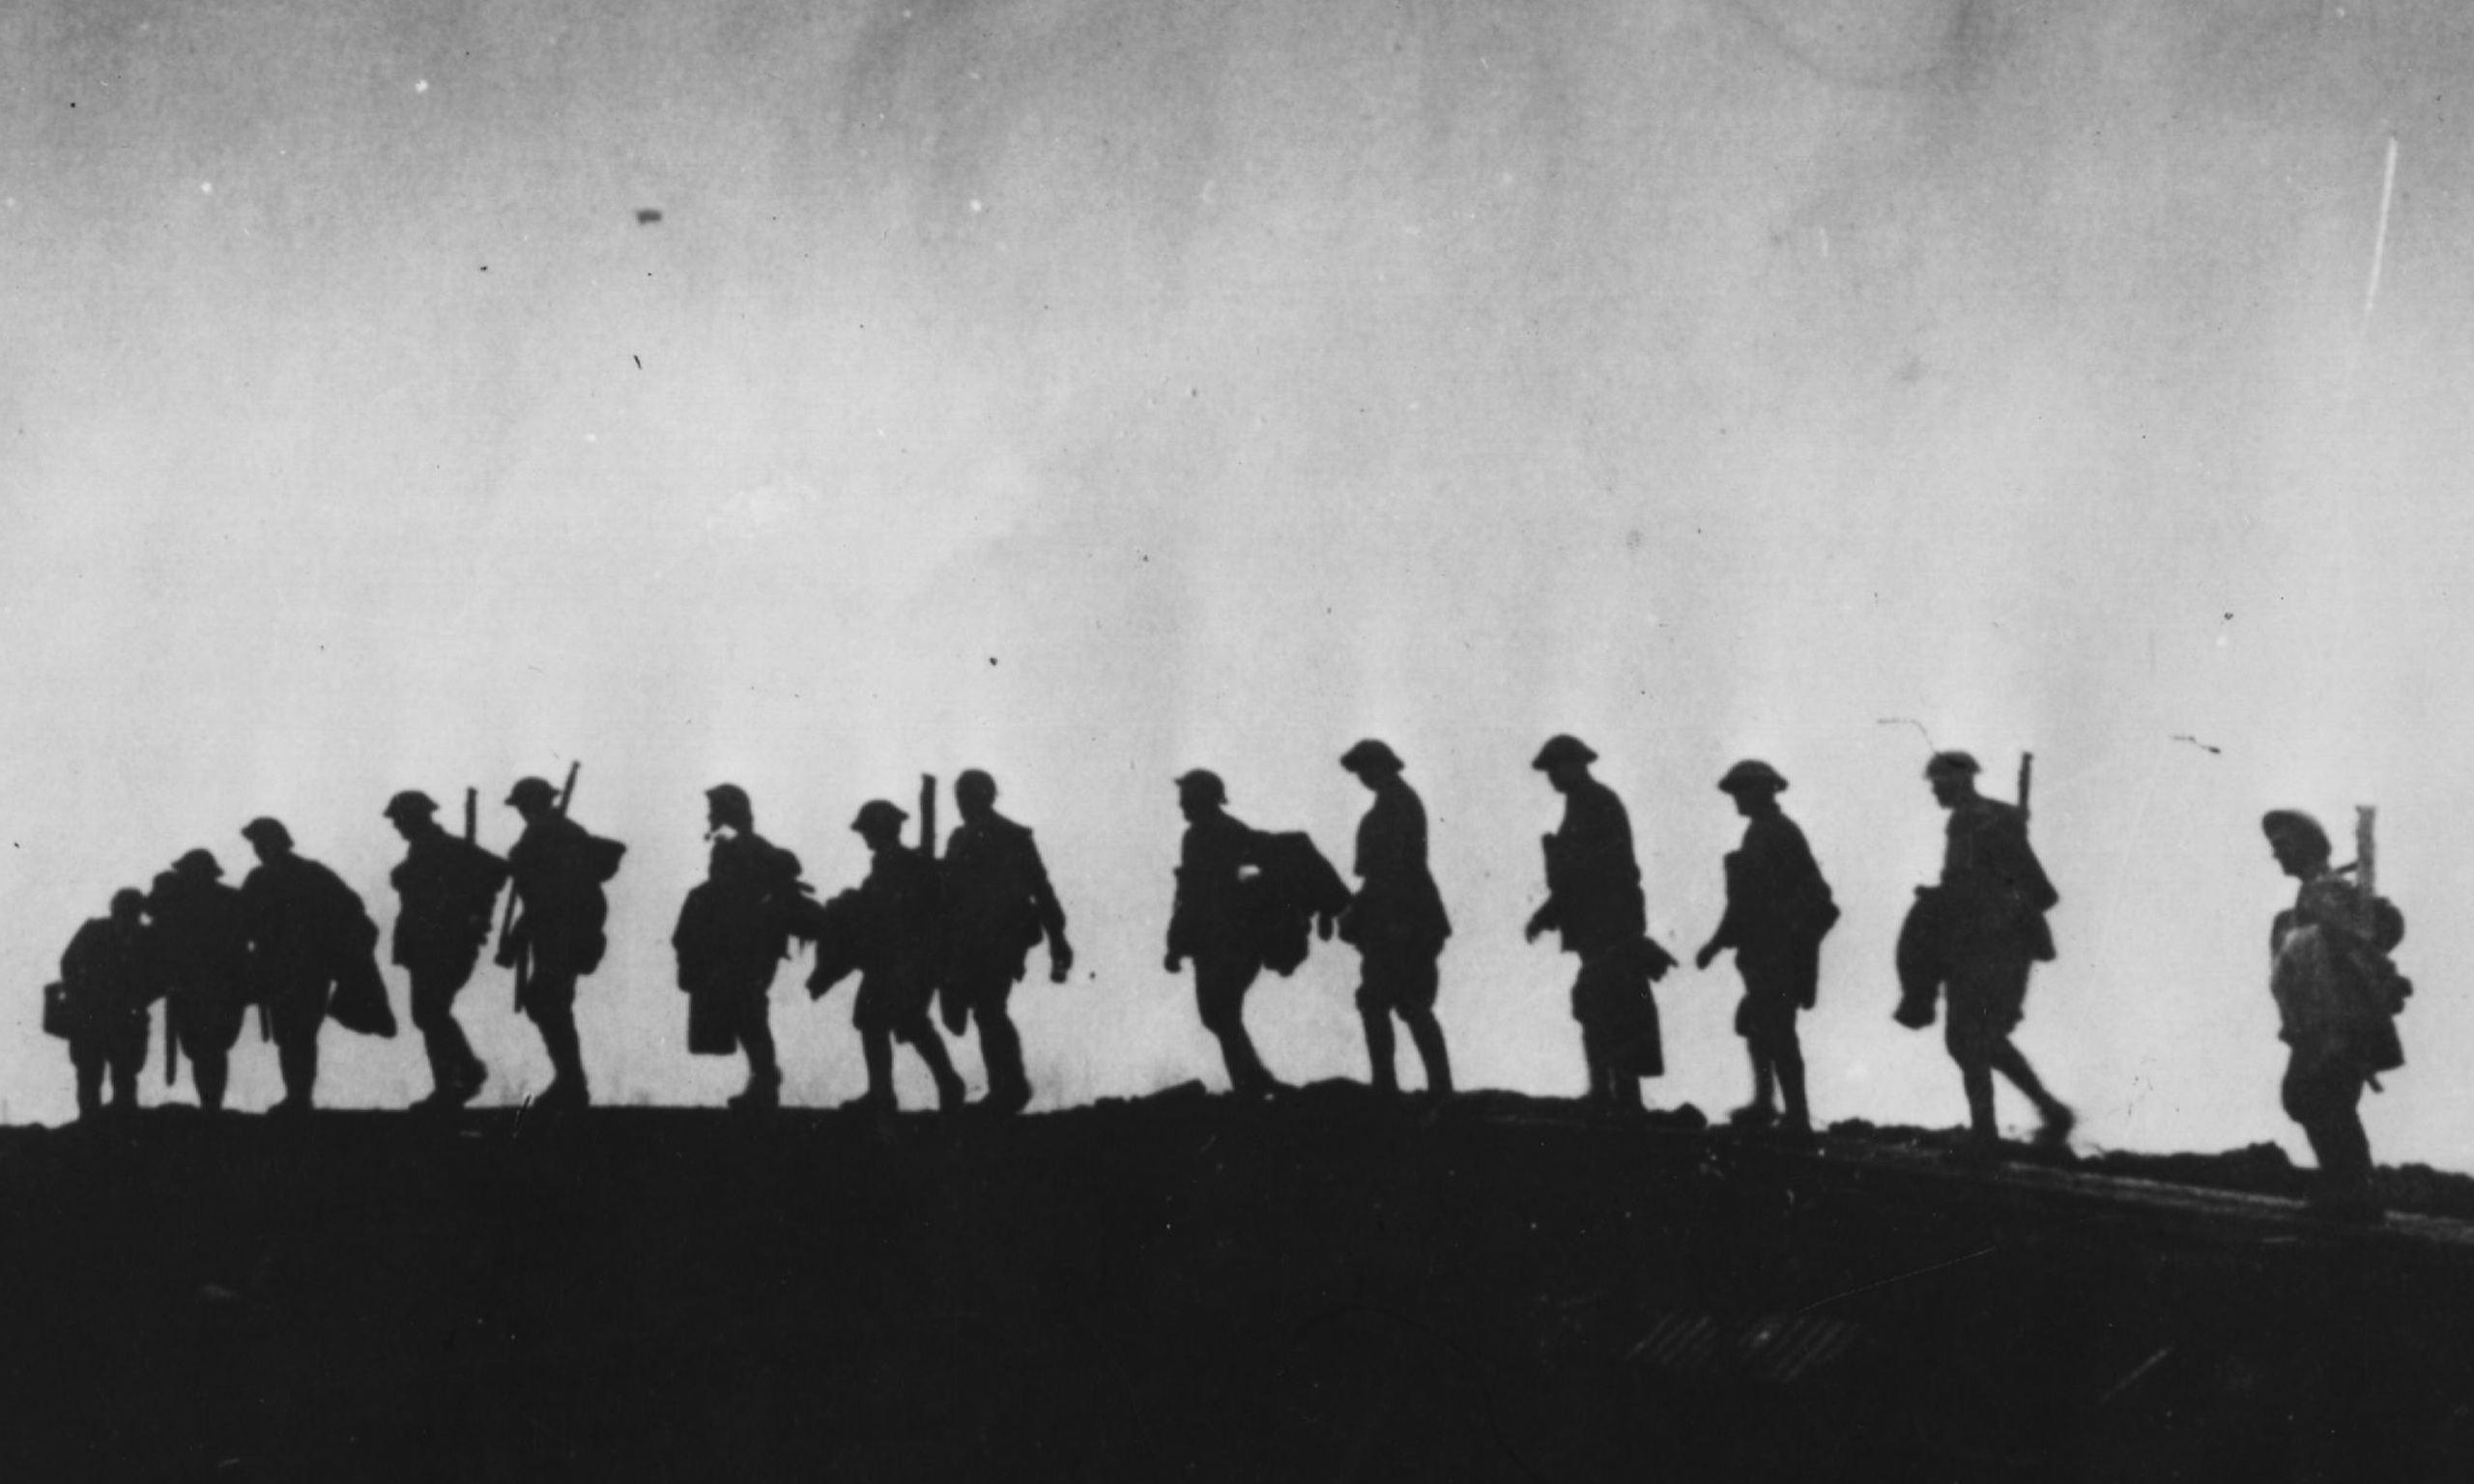 A plattoon of british soldiers walking out of the trenches.